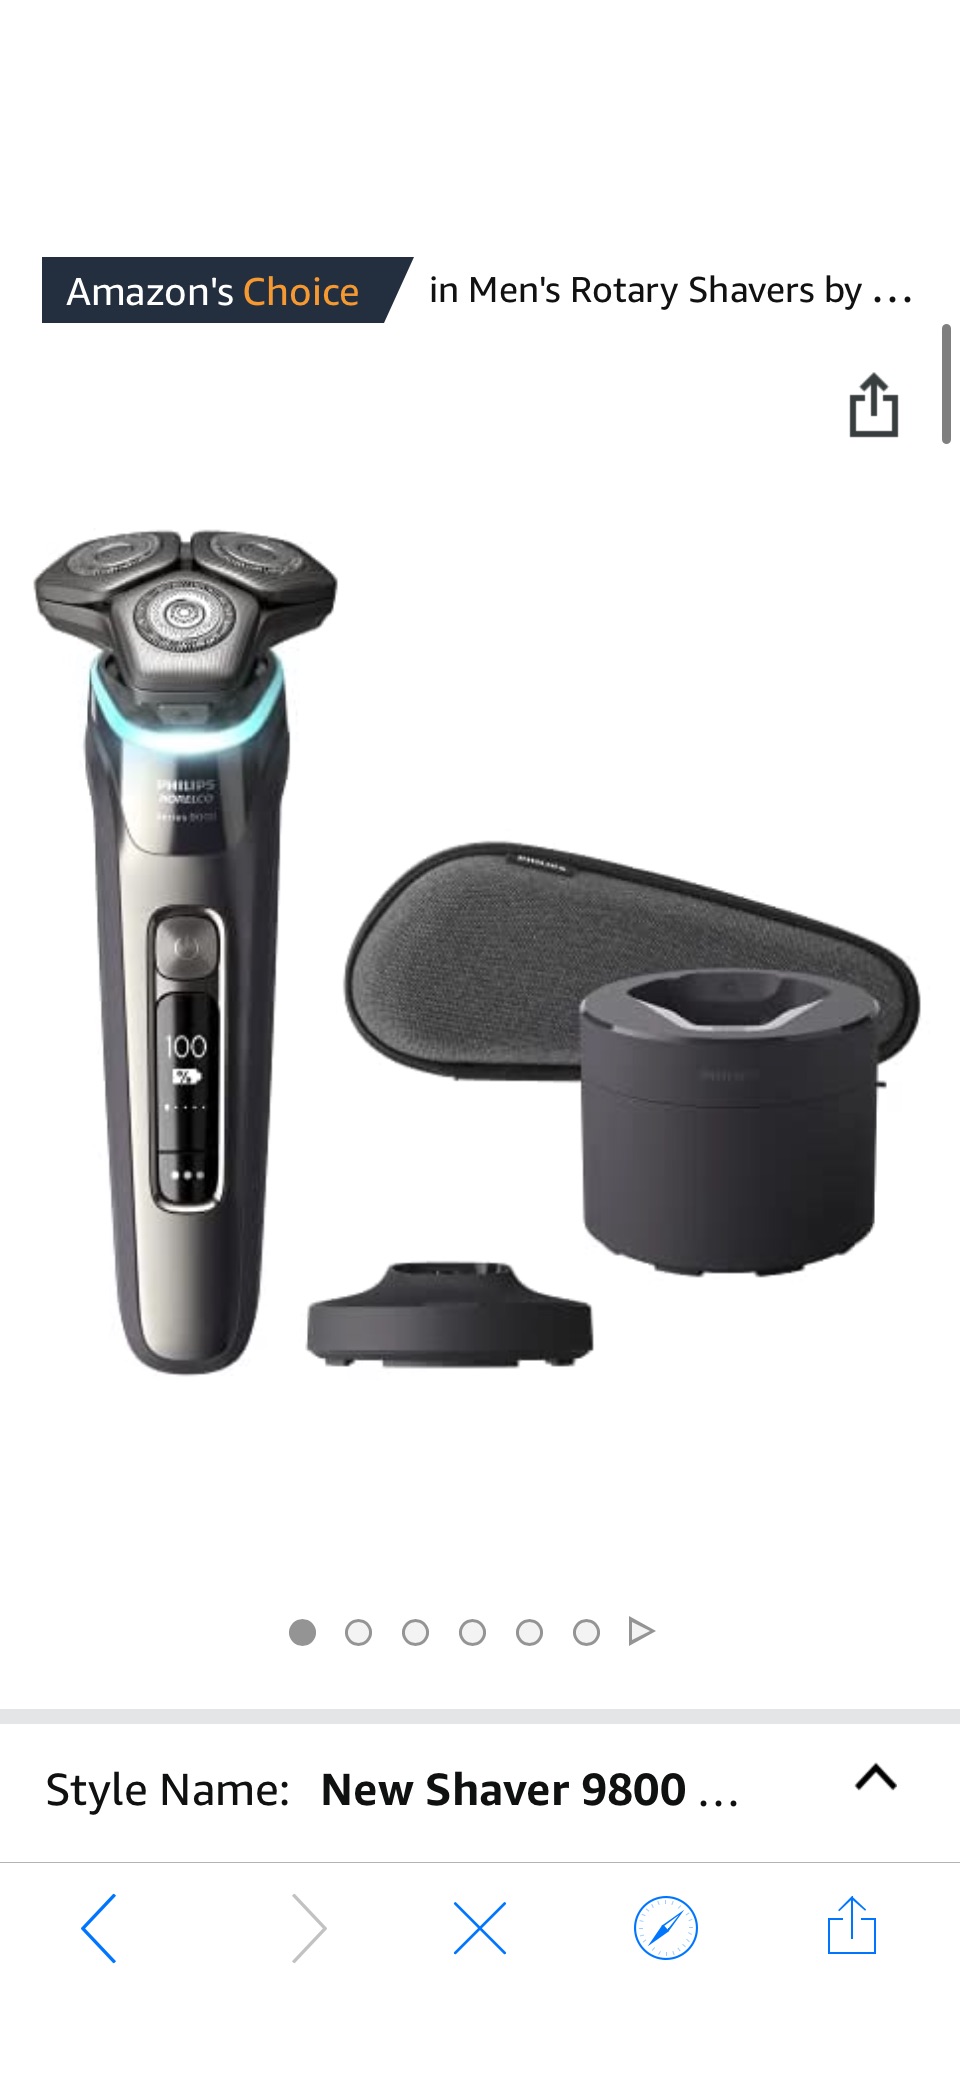 Philips Norelco Exclusive 9800 Rechargeable Wet ＆ Dry Electric Shaver with Quick Clean, Travel Case, Pop up Trimmer, Charging Stand, S9987 85 - 3